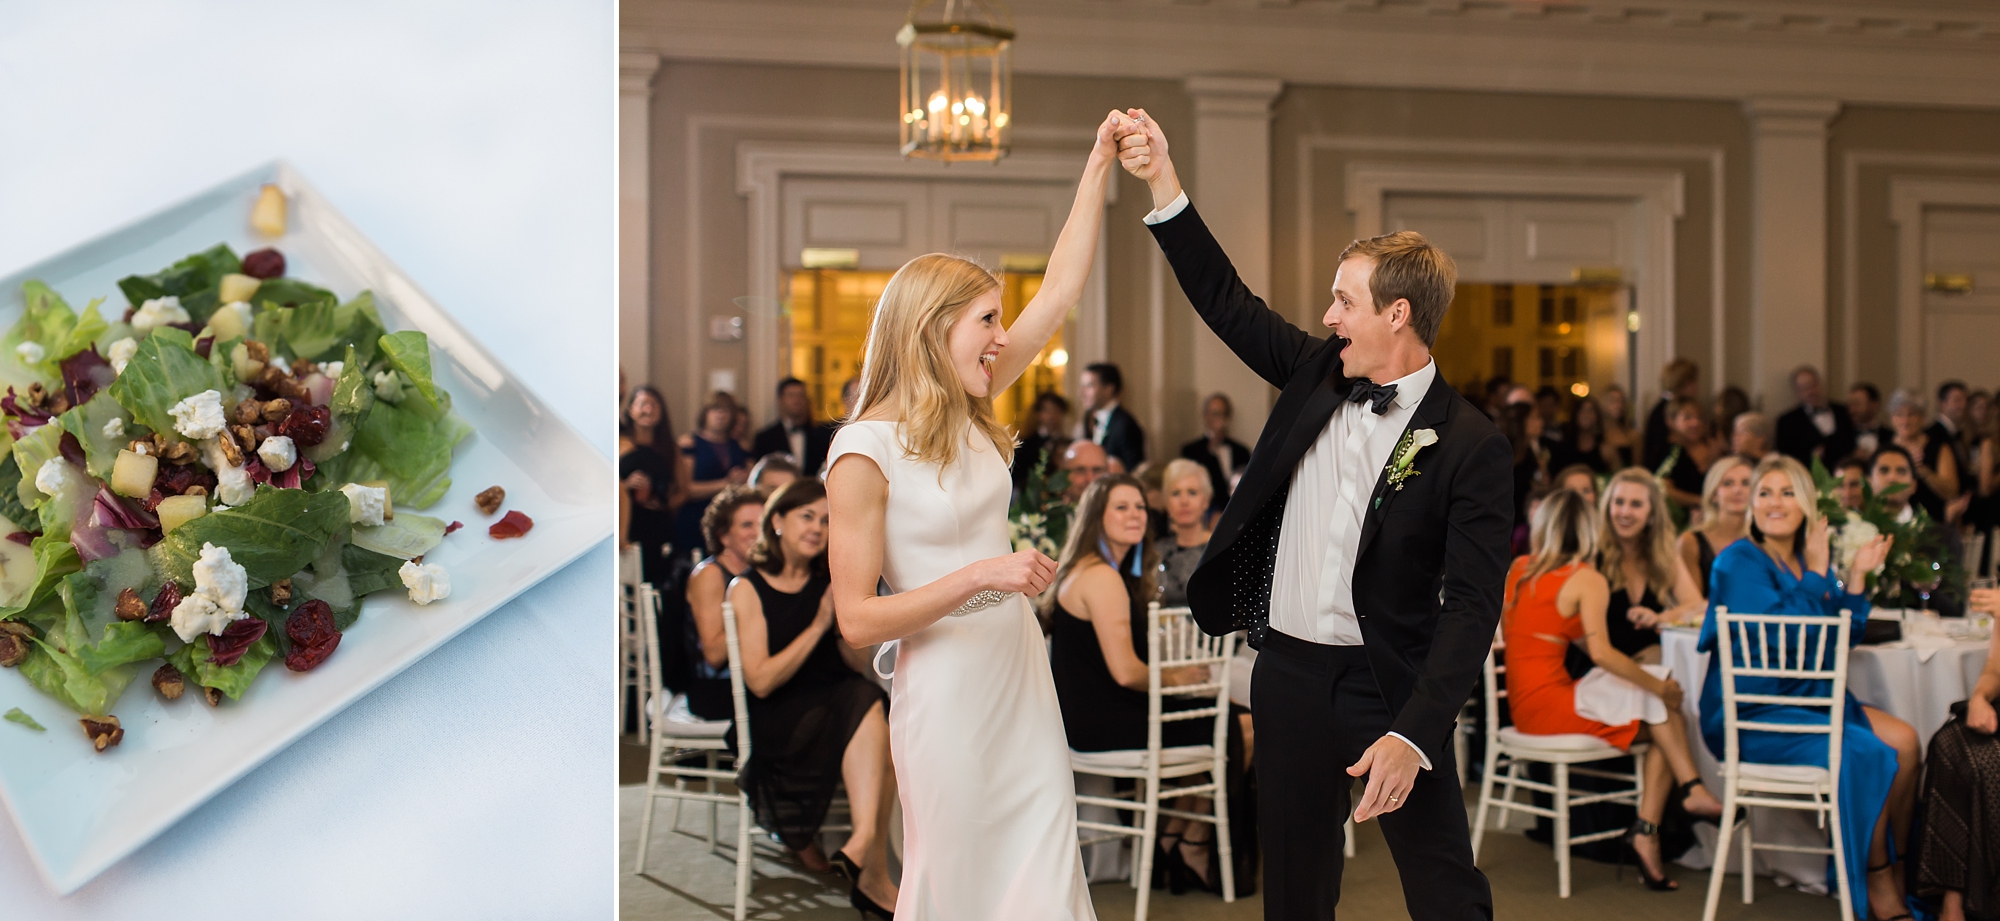 Bride and Groom dancing at prestigious East Lake Golf Club. All photos by Atlanta's Top Wedding Photographers Leigh and Becca.